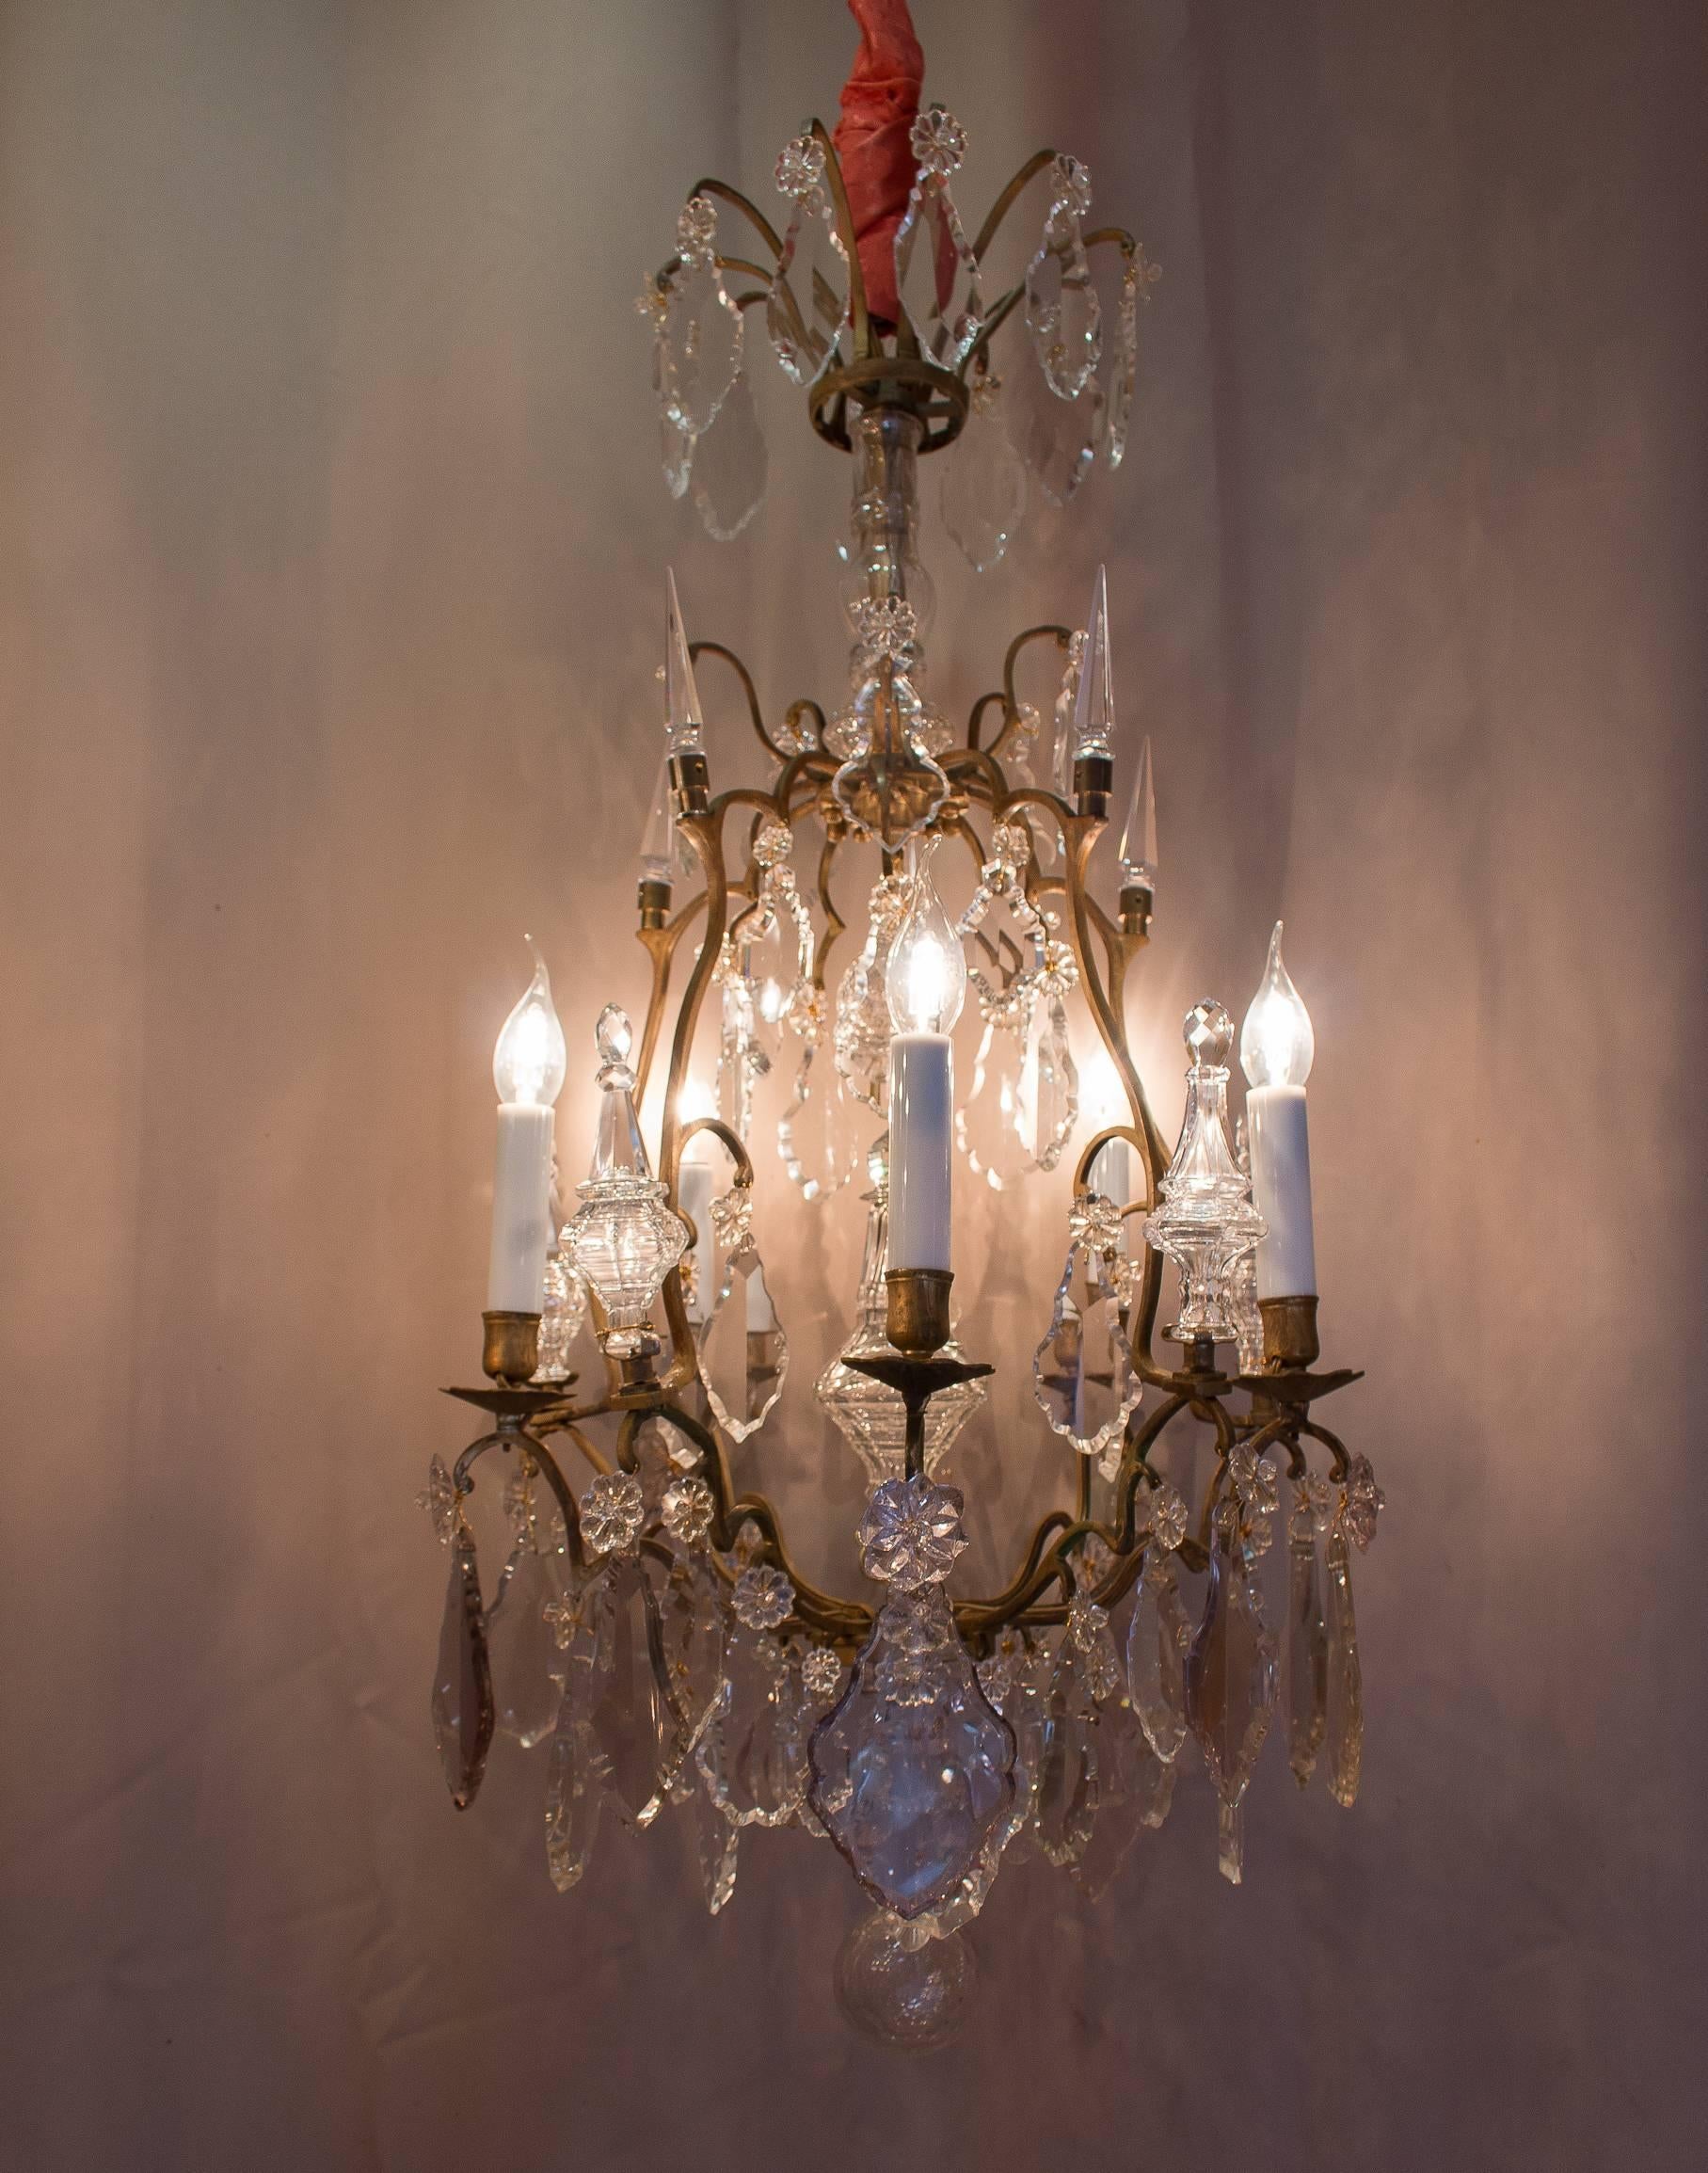 A beautiful and rare, fine quality French late 18th century or early 19th century, in a classical Louis XV style, original bronze and hand-cut crystal, form cage chandelier.
Our chandelier is composed of five elegantly scrolled arm lights and five